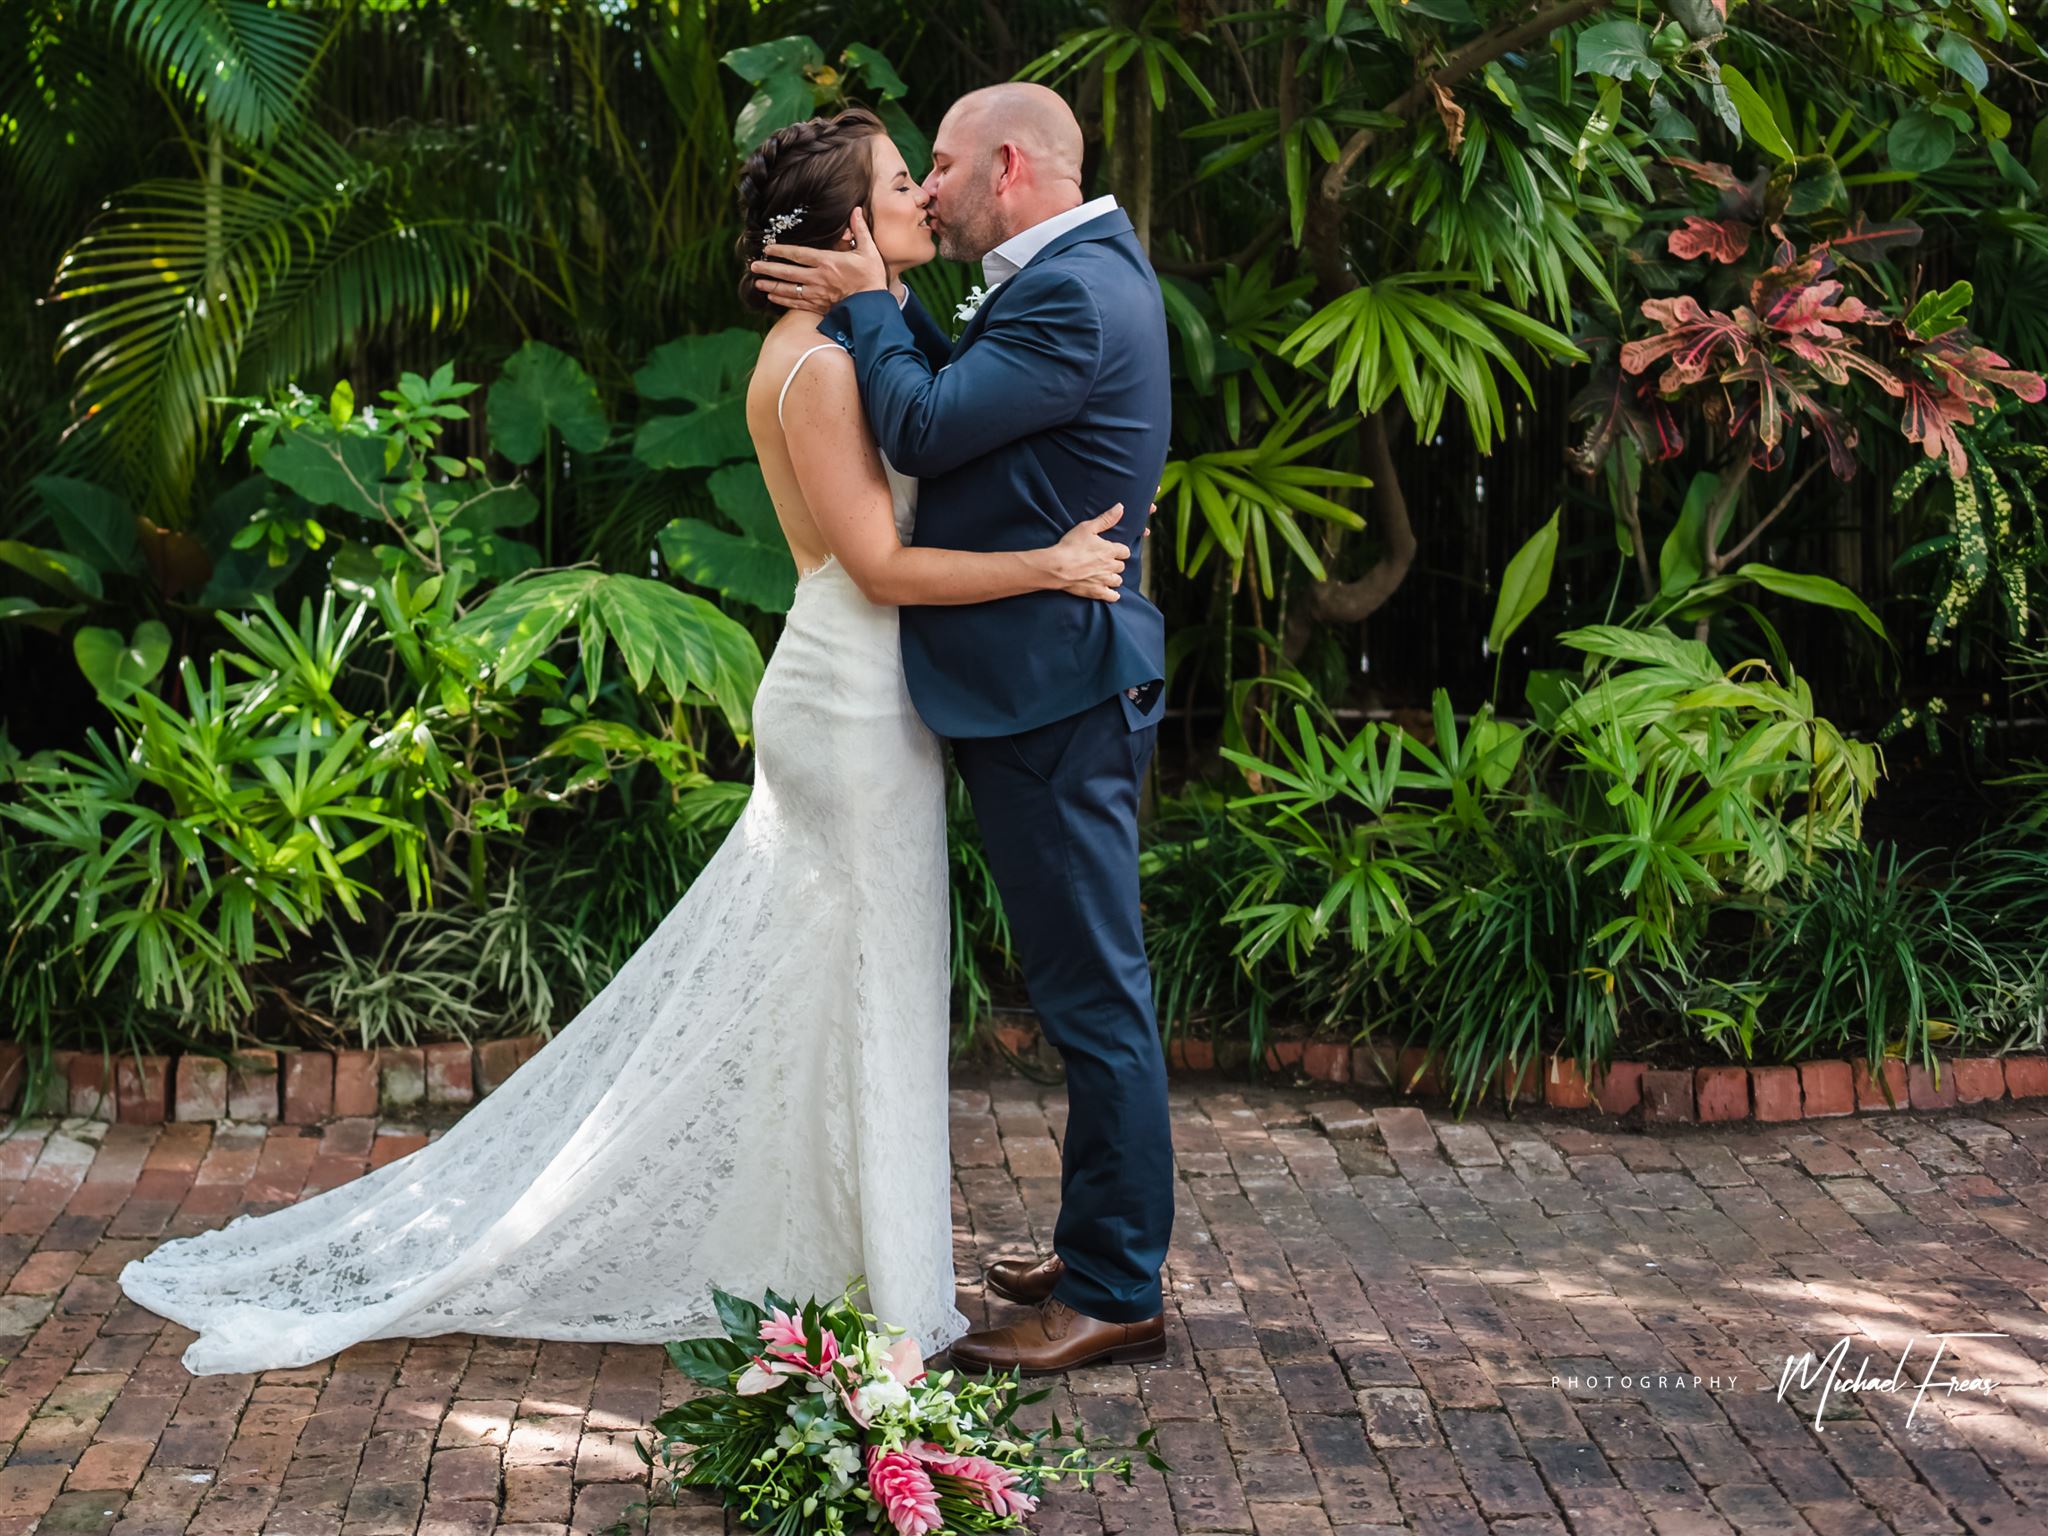 Key West Elopement - Freas Photography